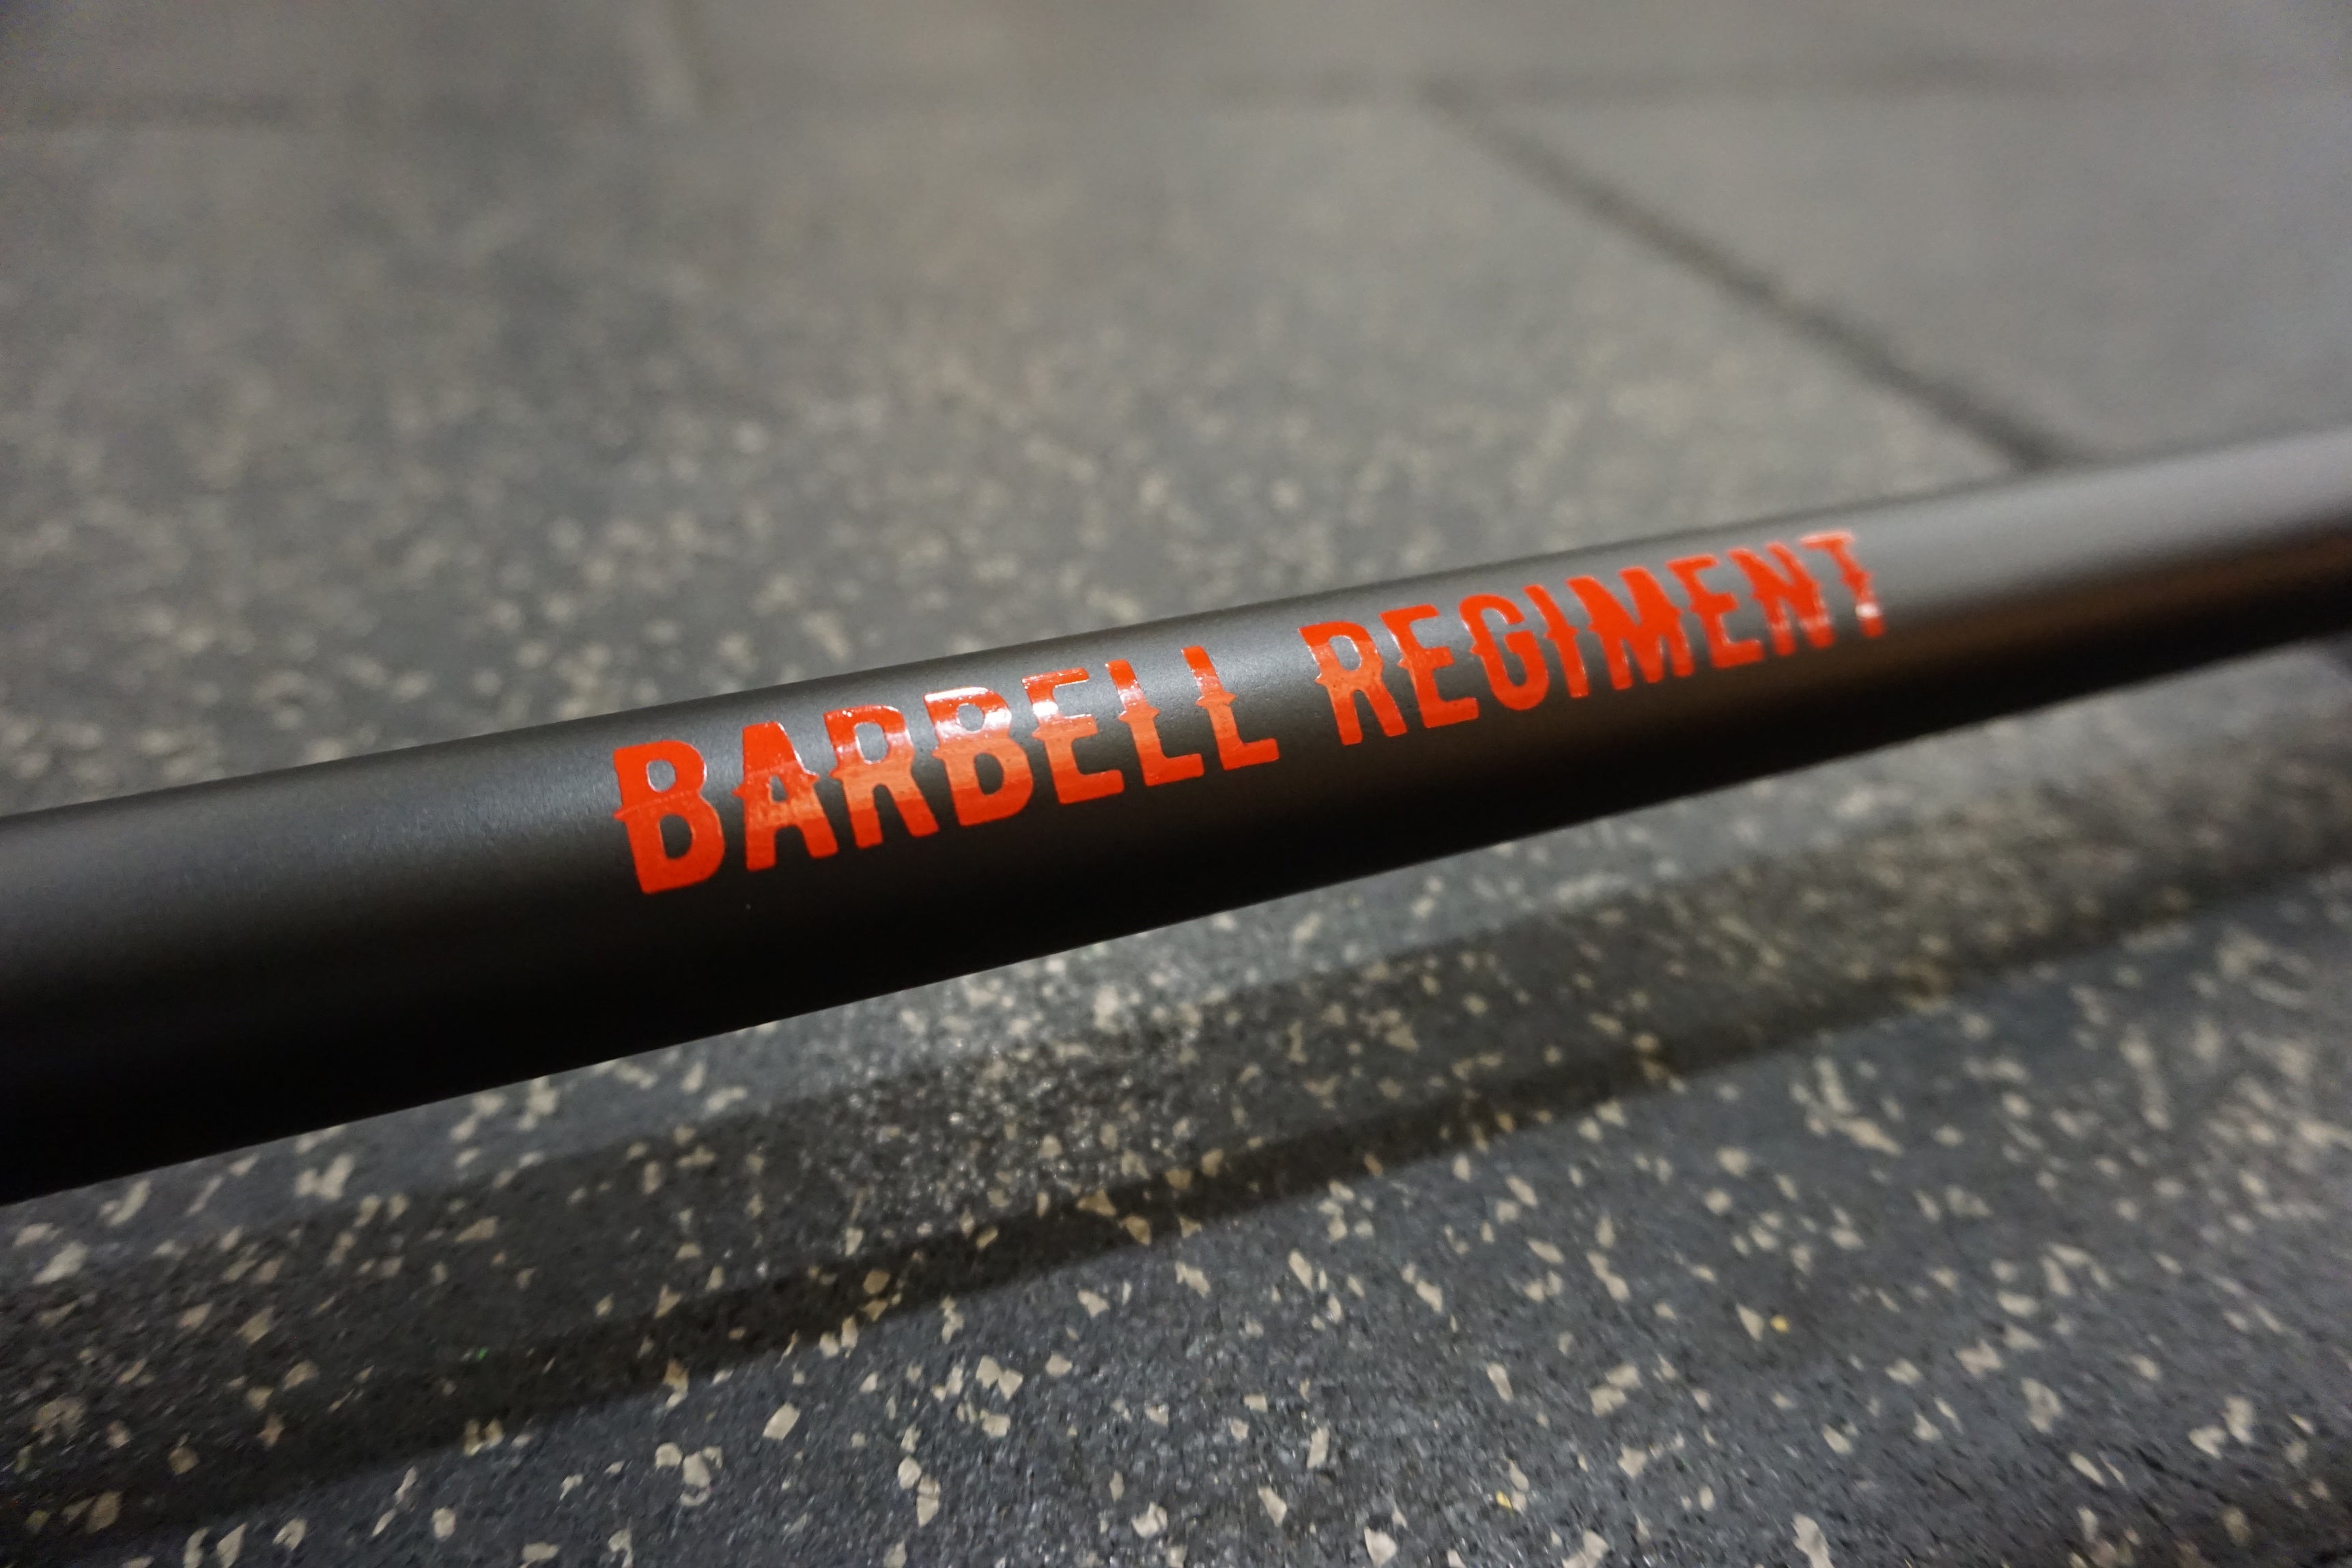 The Regiment Barbell